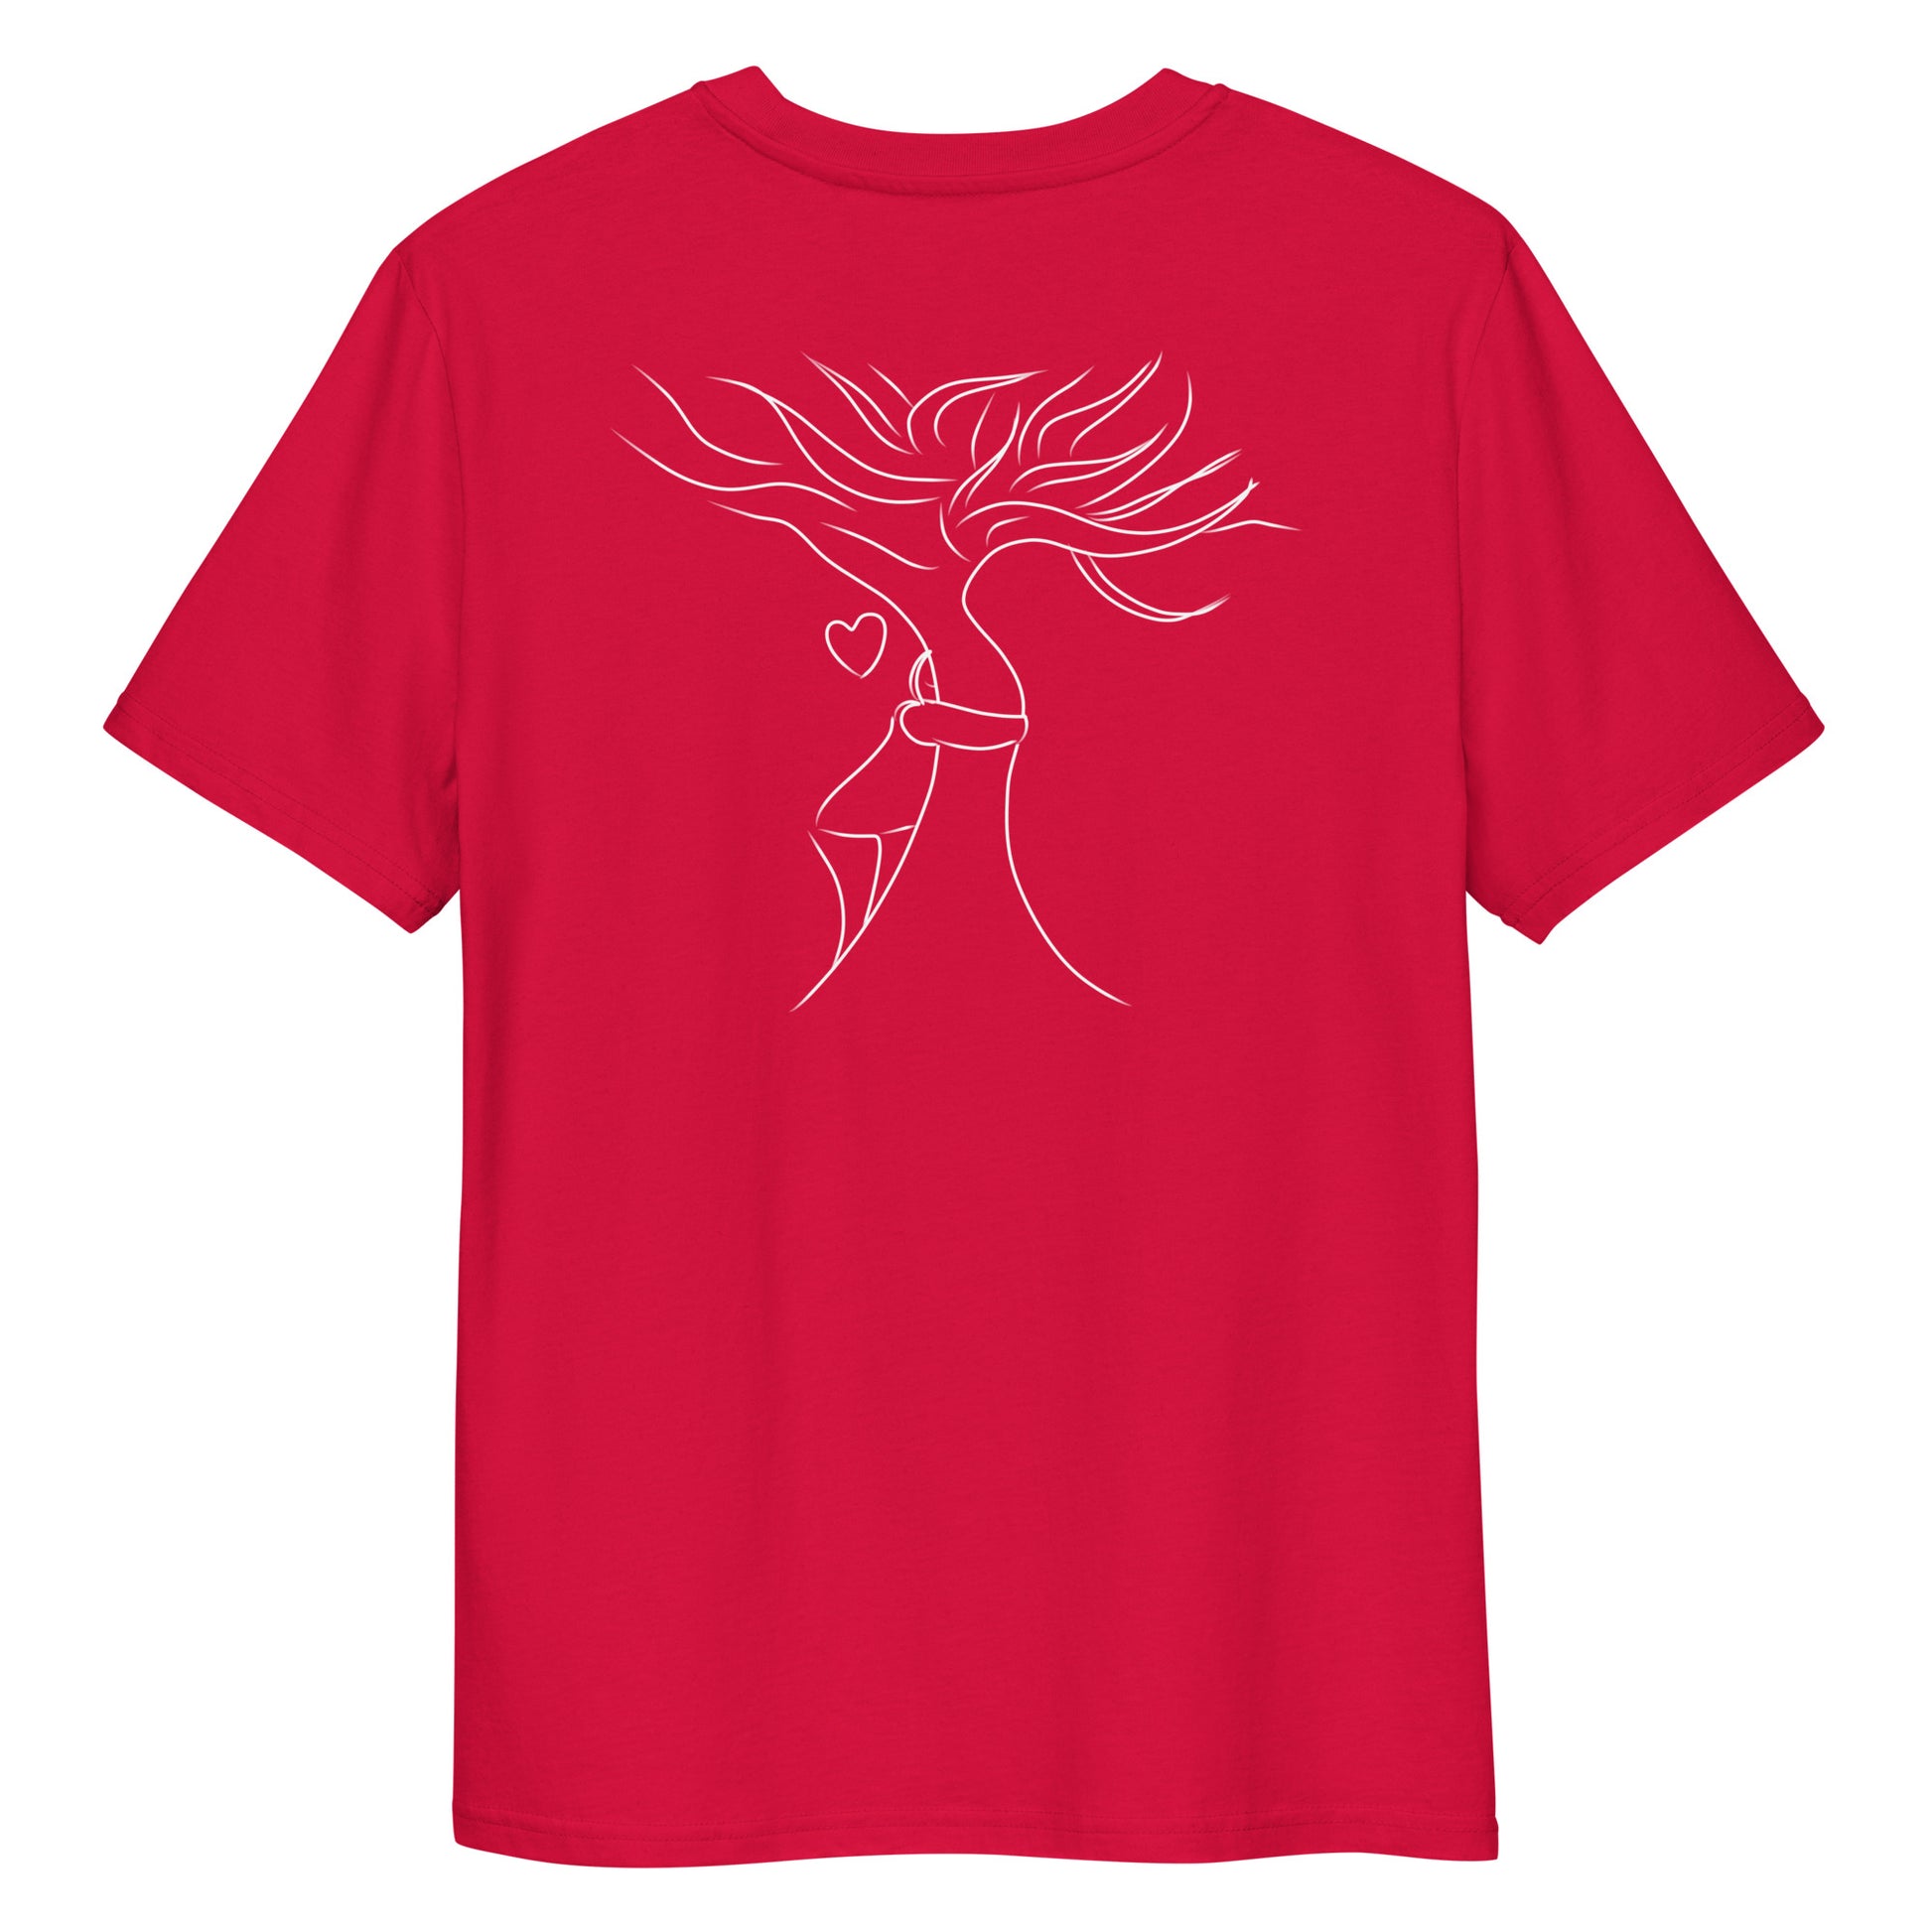 Sustainable Embrace White Tree | 100% Organic Cotton T Shirt in red back